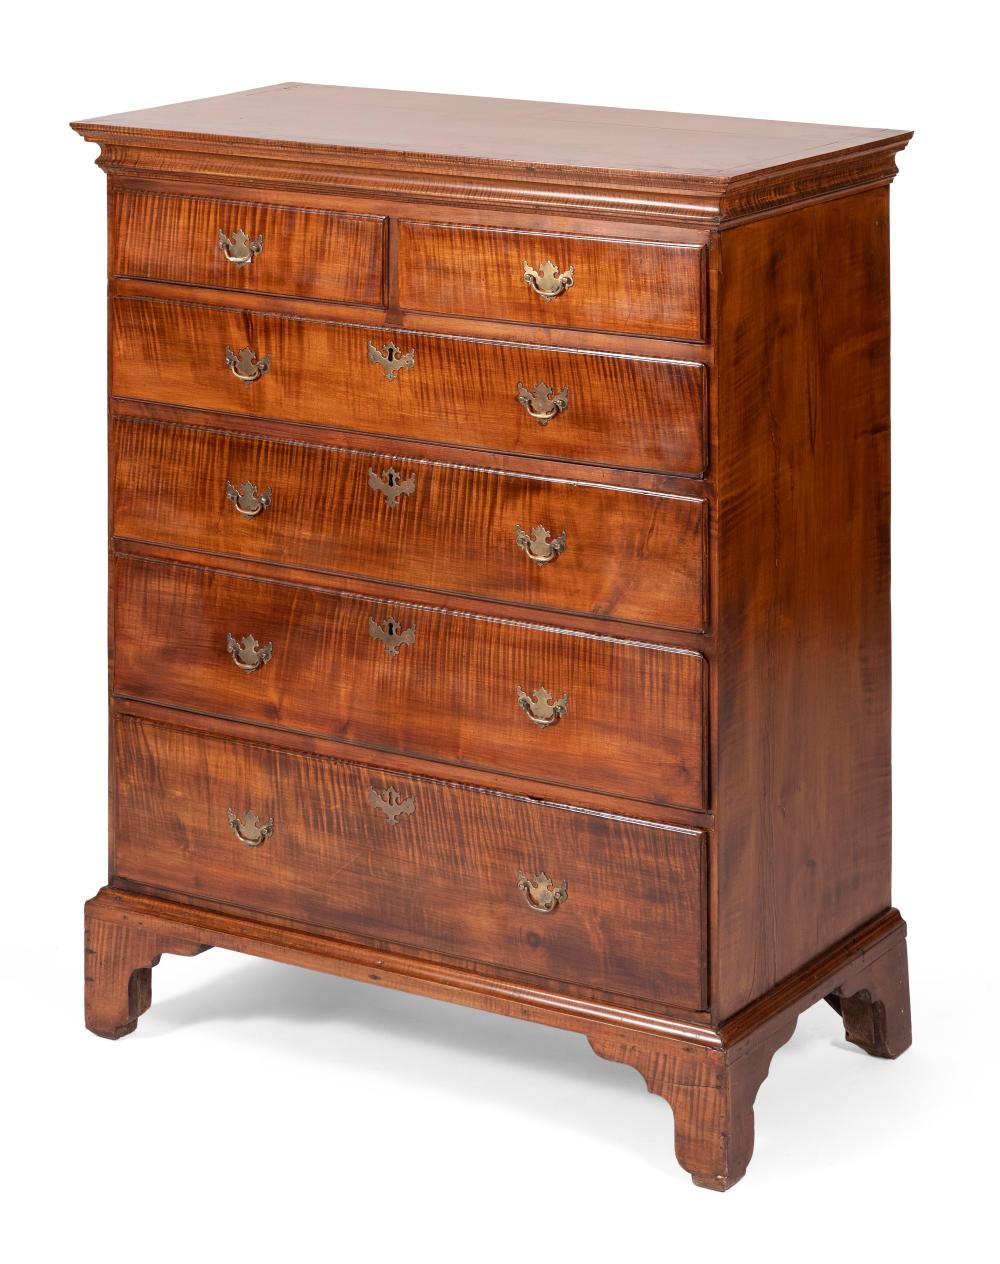 CHIPPENDALE TALL CHEST RHODE ISLAND,